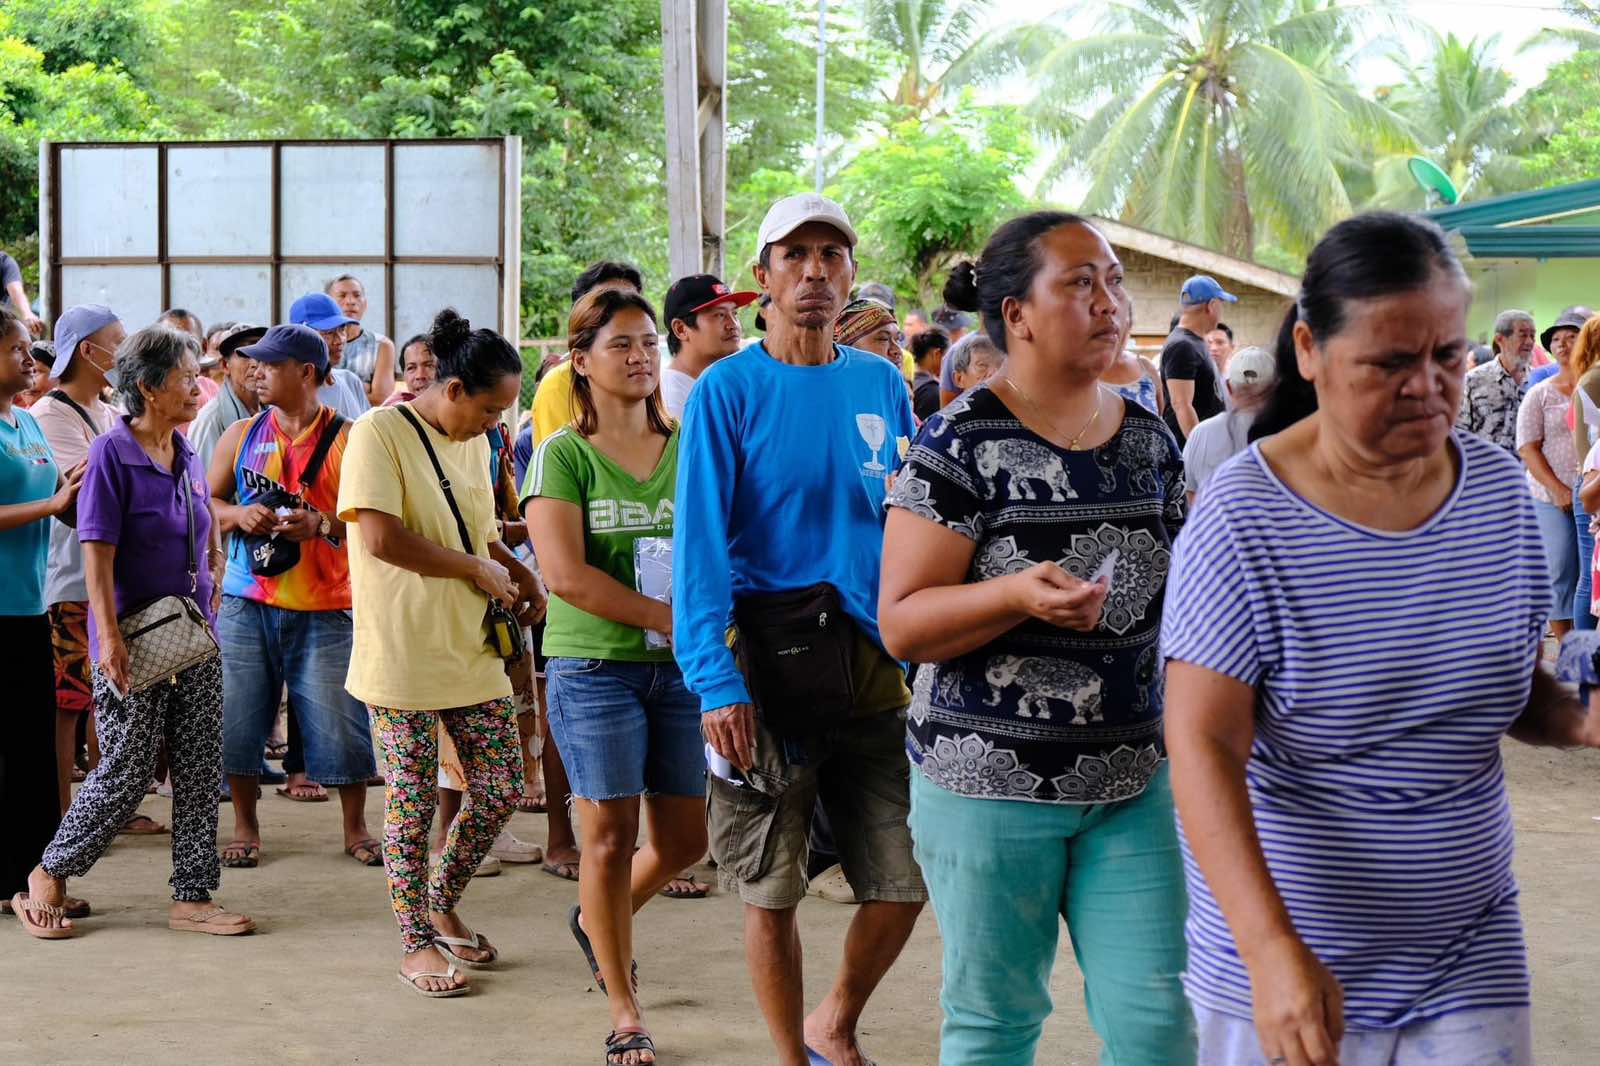 Residents of Barangay Magupising are eagerly waiting to get their relief assistance coupon.【Photo by Tzu Chi Davao】